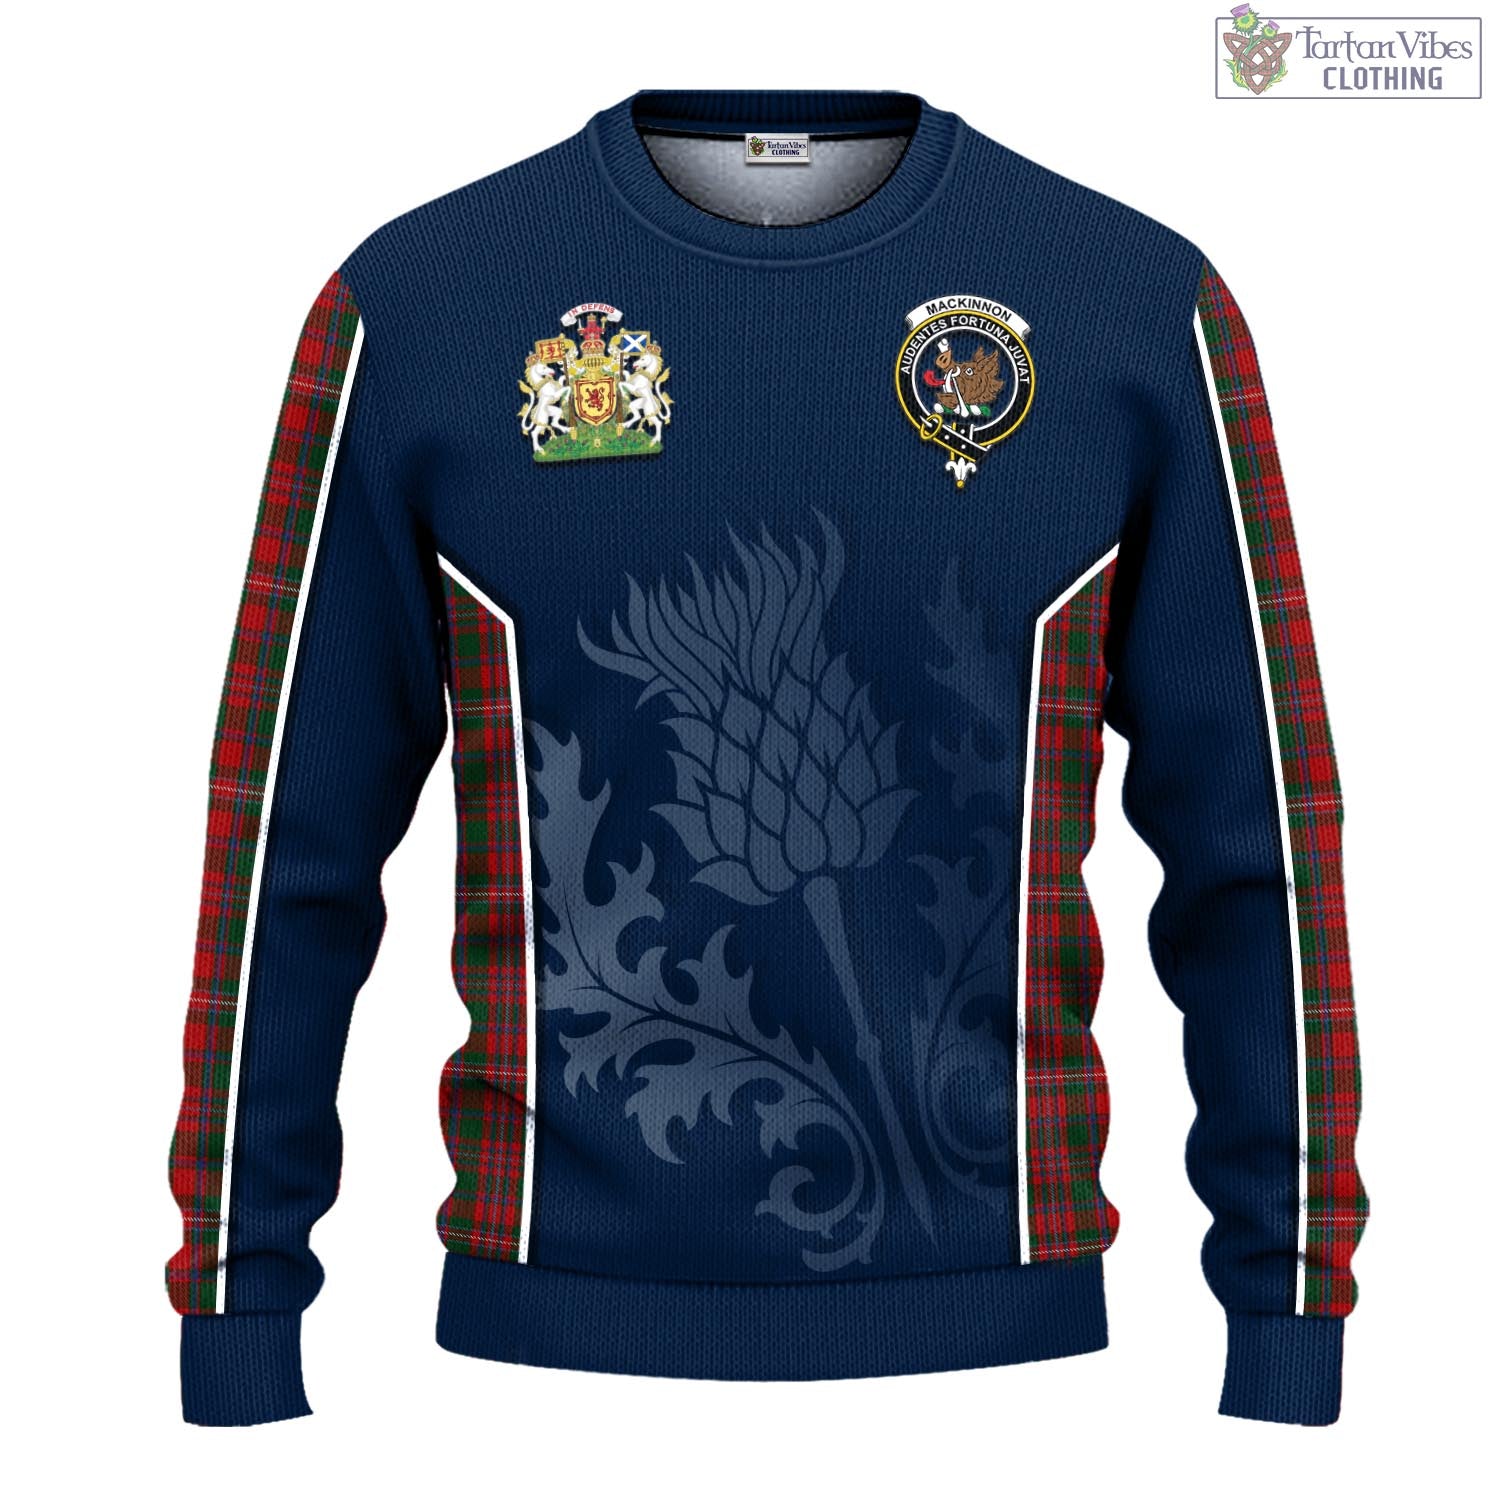 Tartan Vibes Clothing MacKinnon Tartan Knitted Sweatshirt with Family Crest and Scottish Thistle Vibes Sport Style